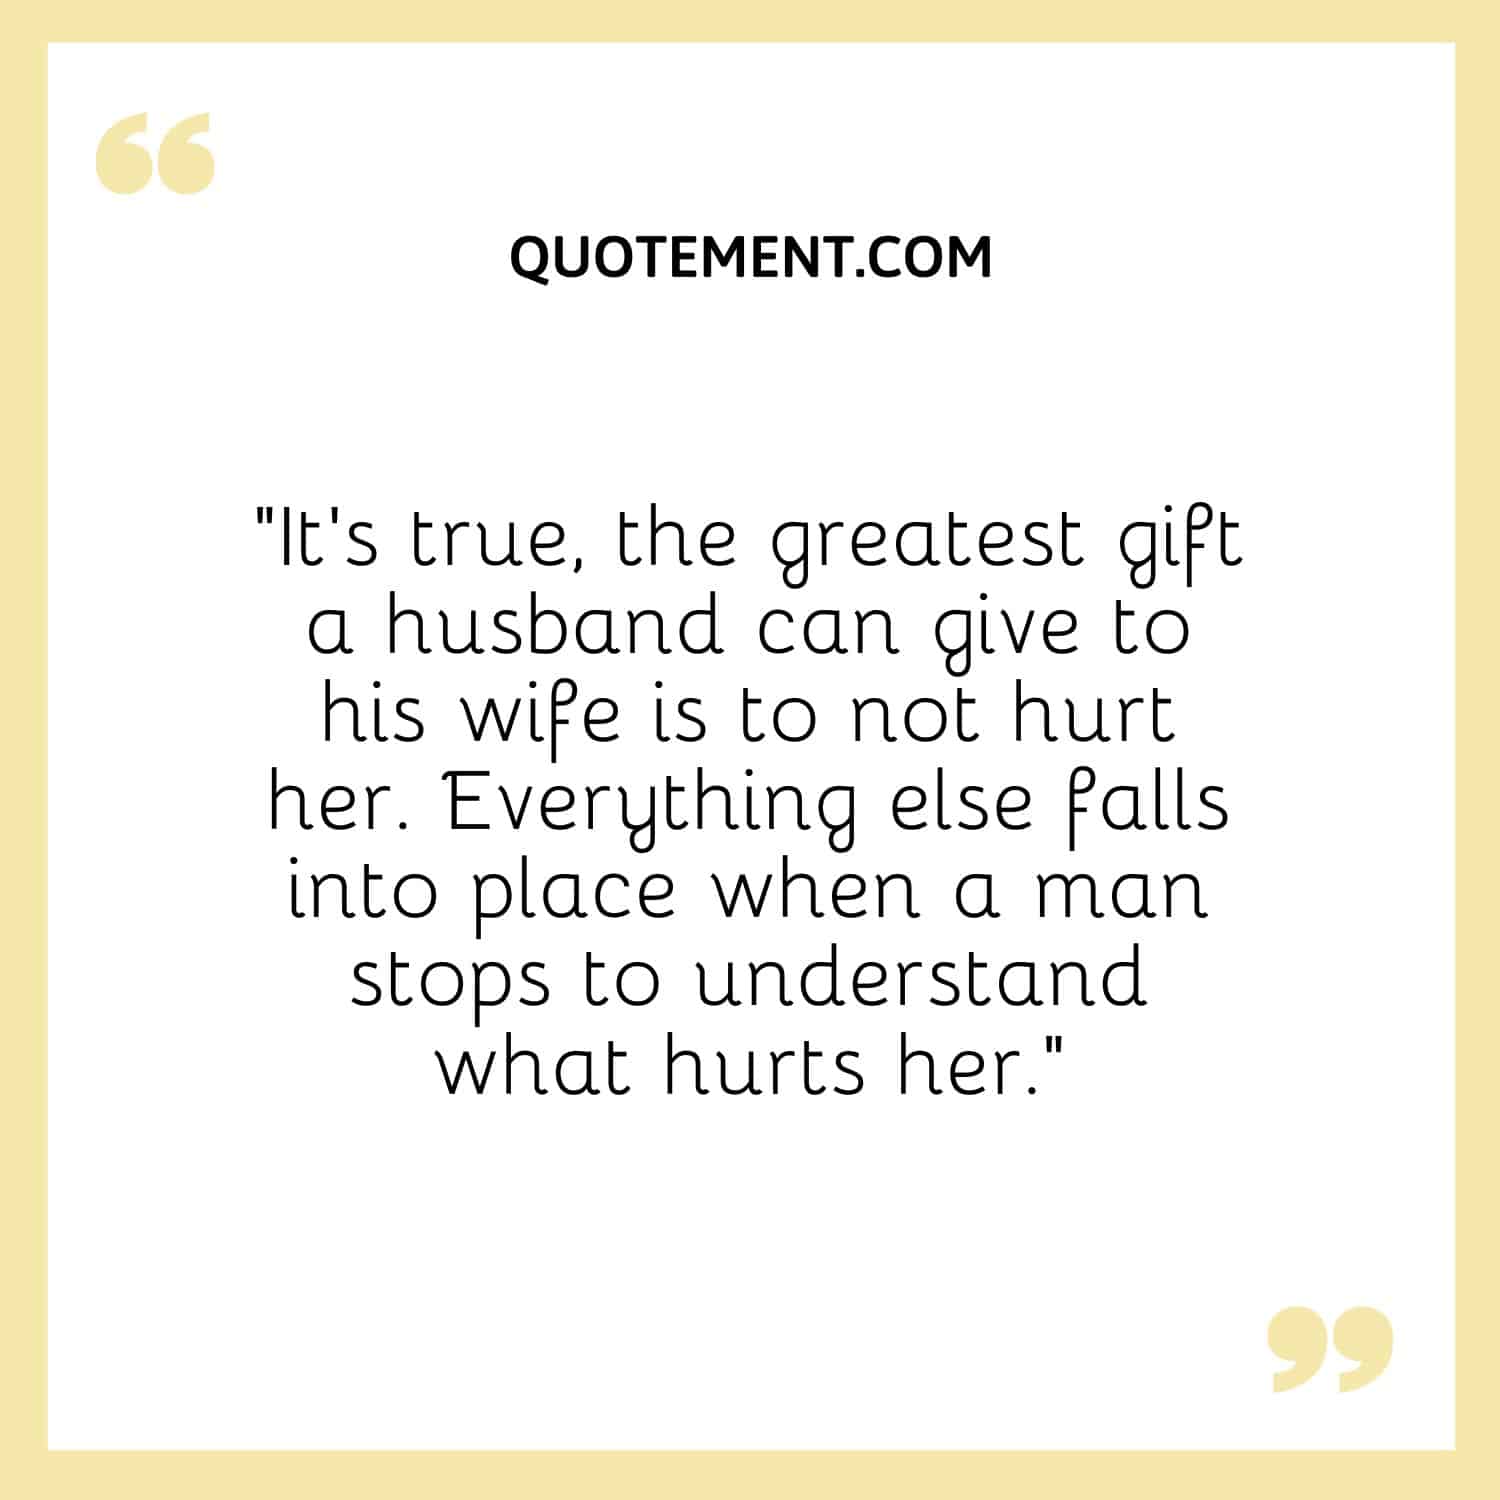 It’s true, the greatest gift a husband can give to his wife is to not hurt her